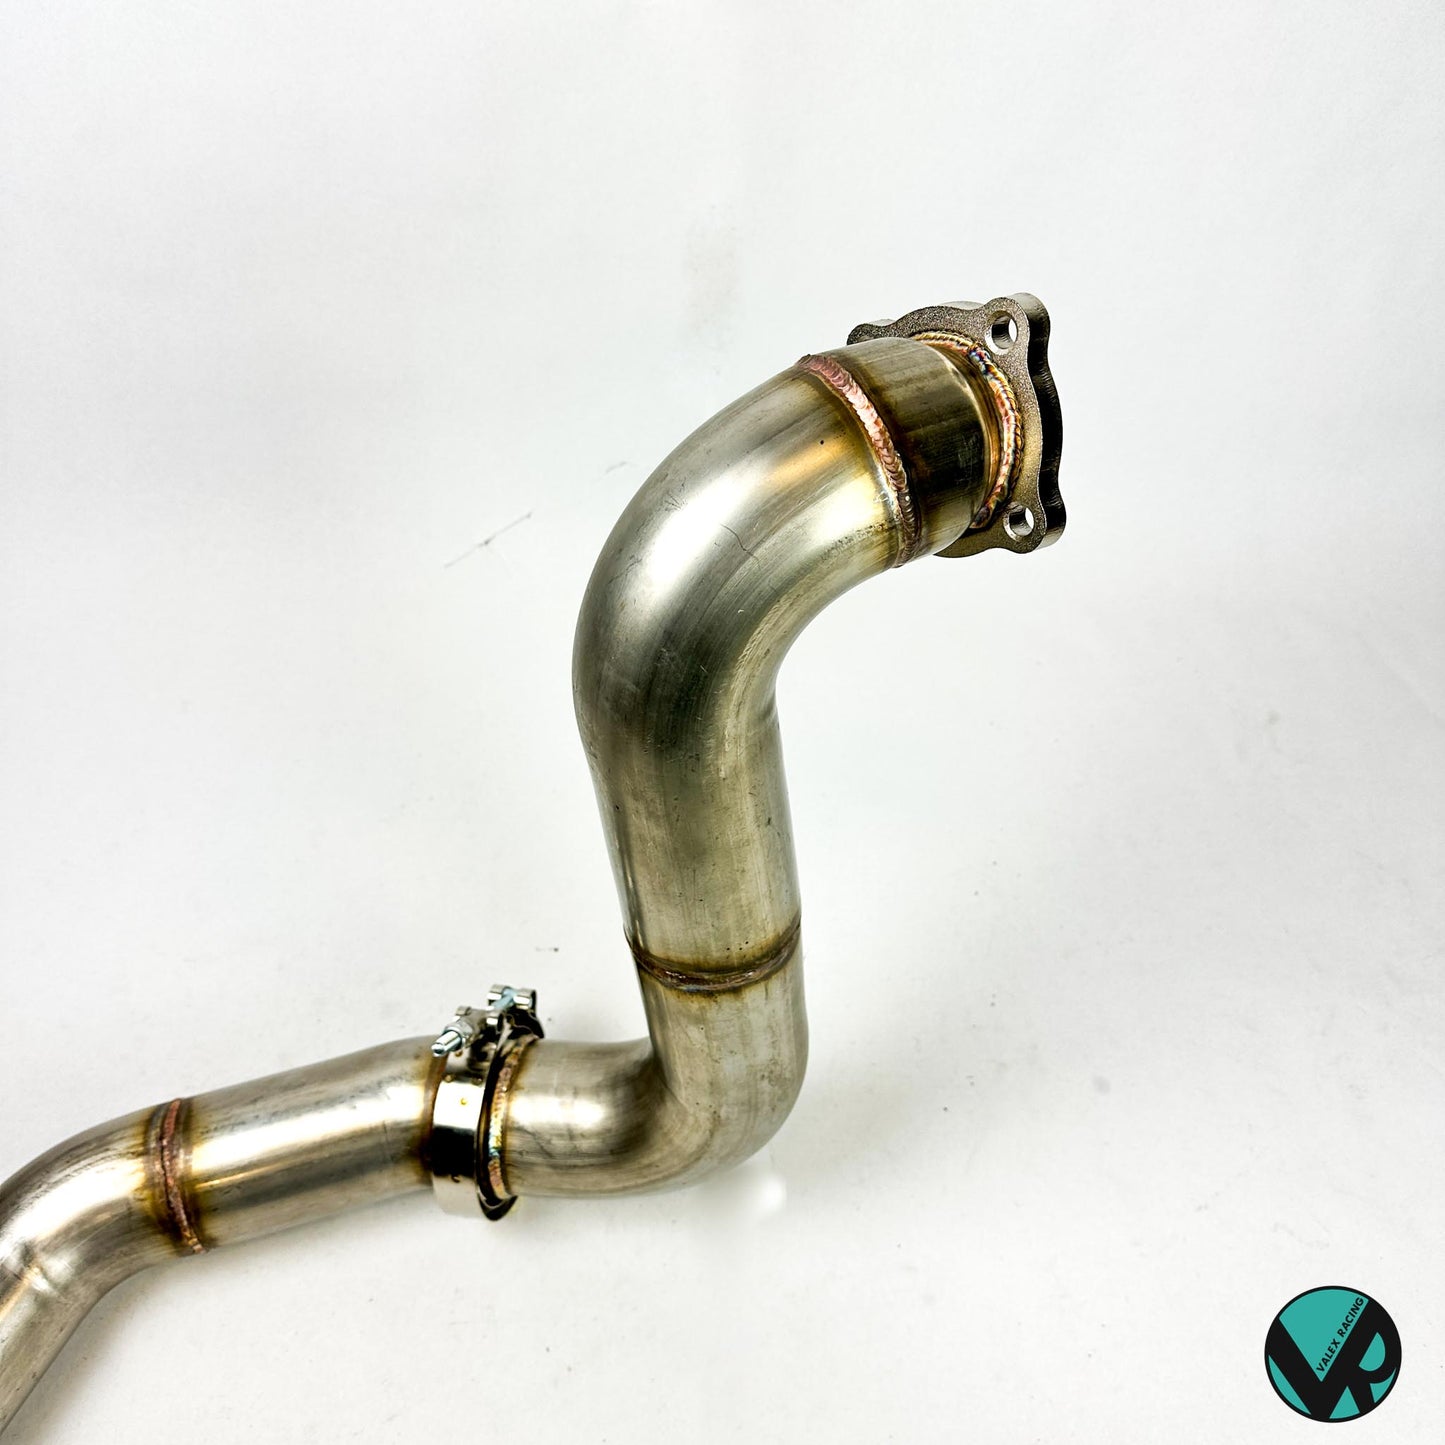 RSX K20 | PLM Power Driven Downpipe for RSX